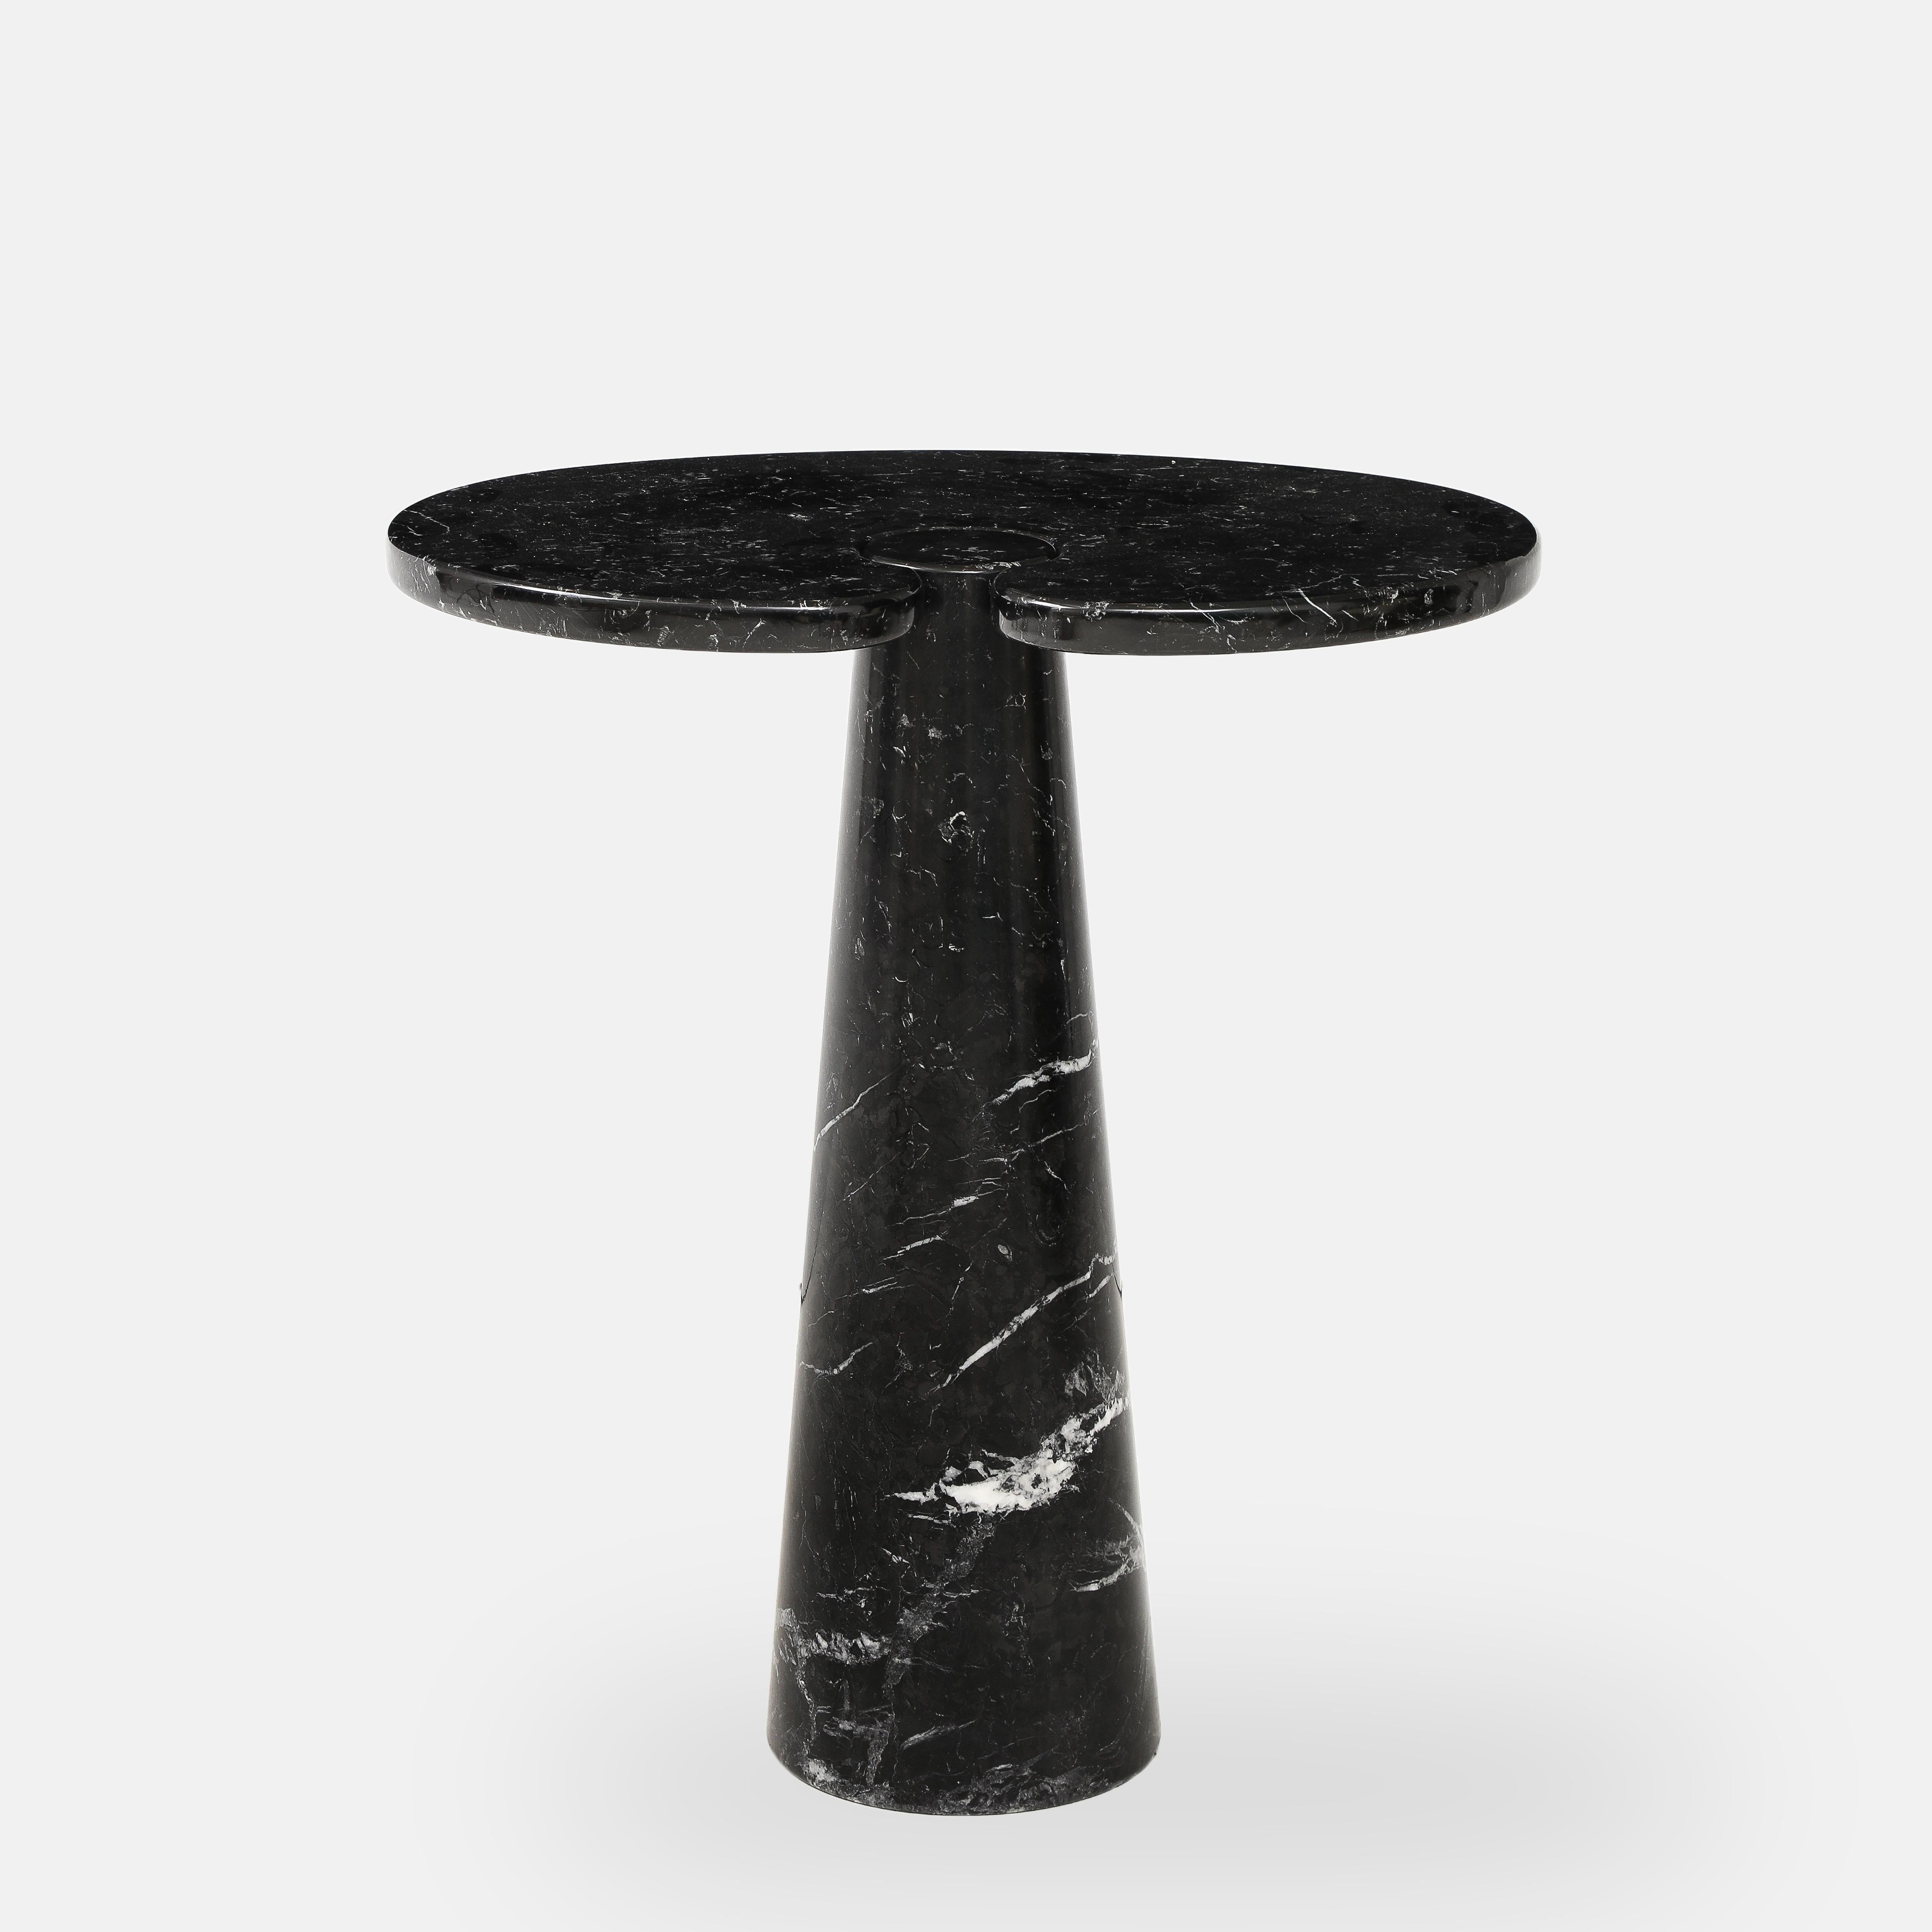 Designed by Angelo Mangiarotti for Skipper from the 'Eros' series, Nero Marquina marble tall side table or console with top fitted on a conical base. This elegantly organic table has beautiful subtle veining throughout. Original Skipper label on